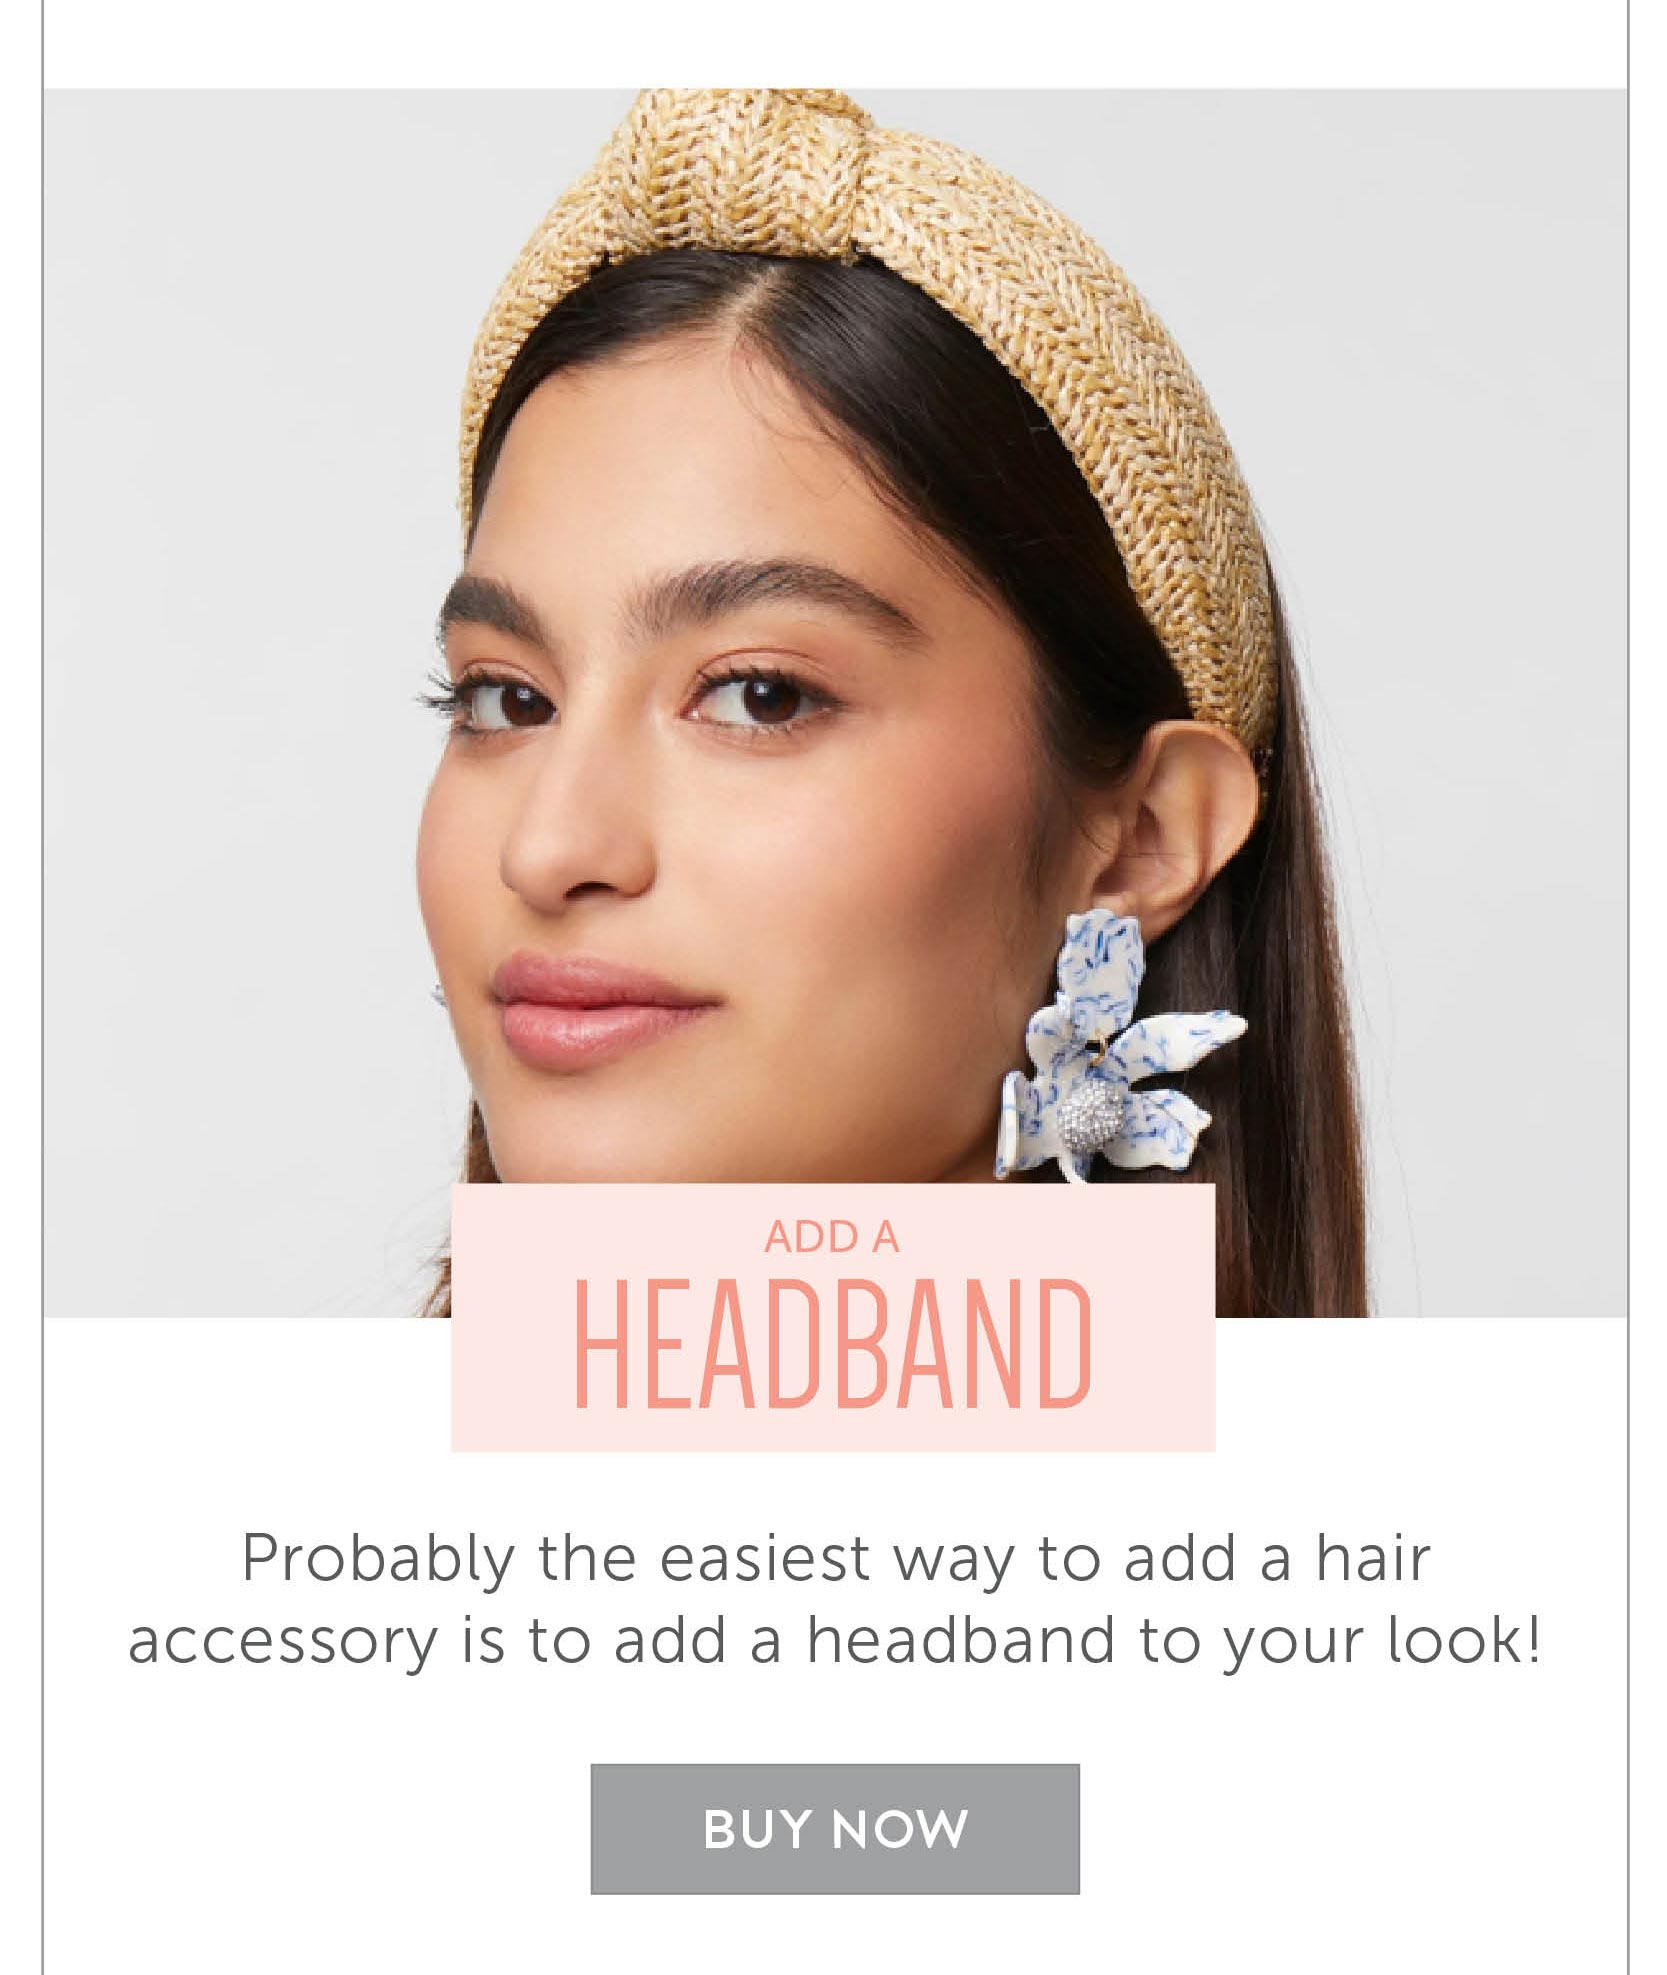 Add a headband Probably the easiest way to add a hair accessory is to add a headband to your look! 